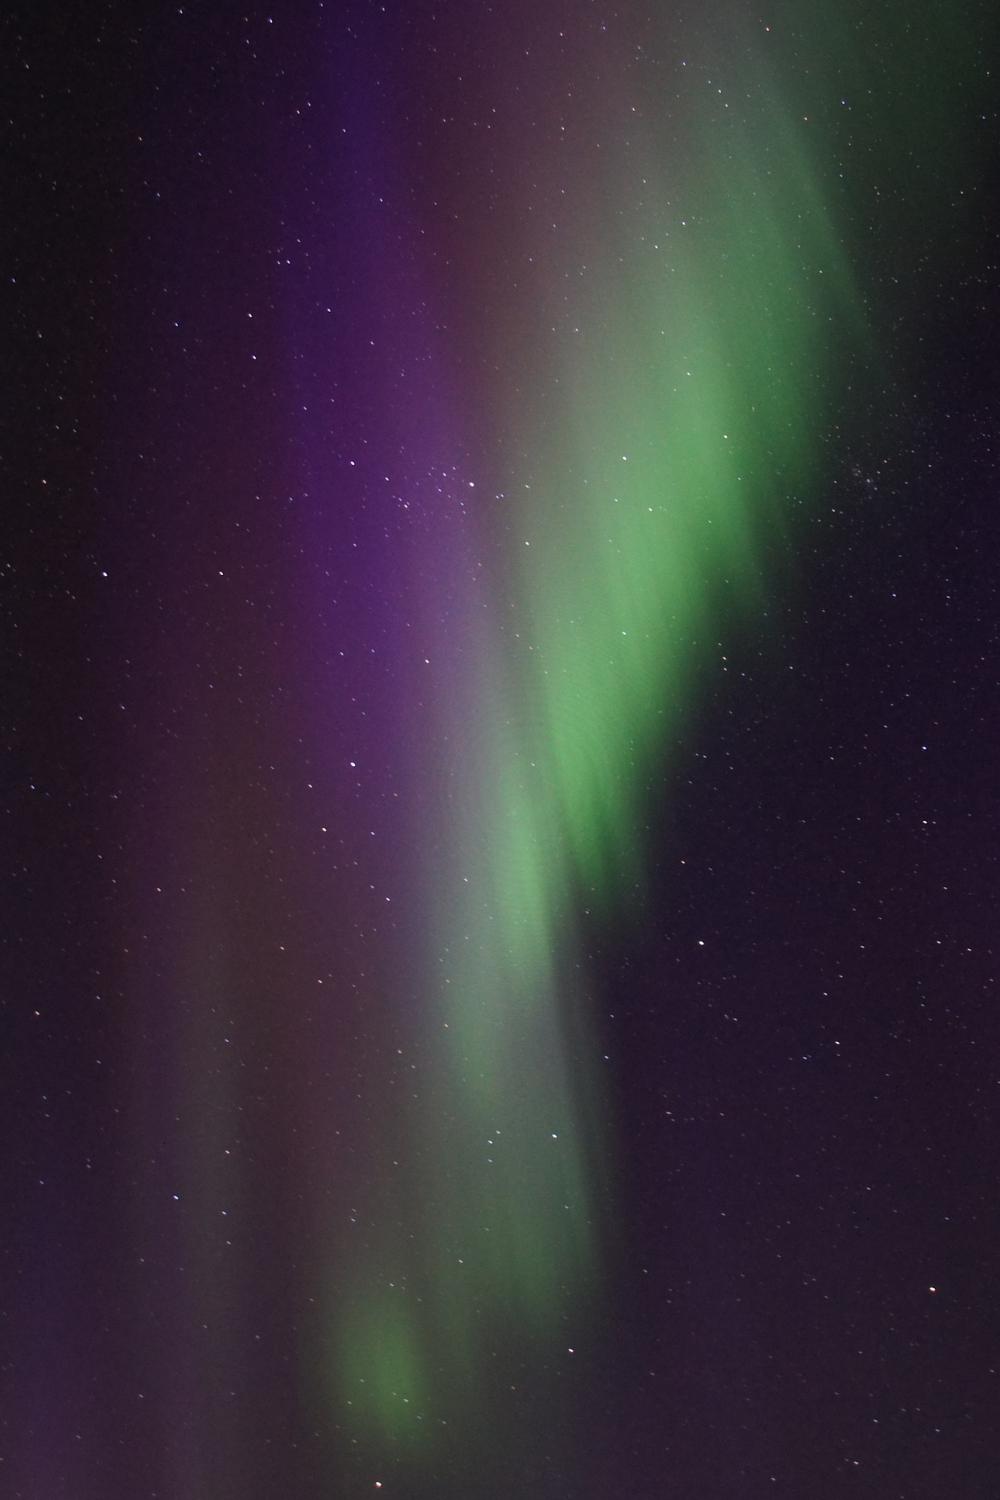 Pale green and purple northern lights.